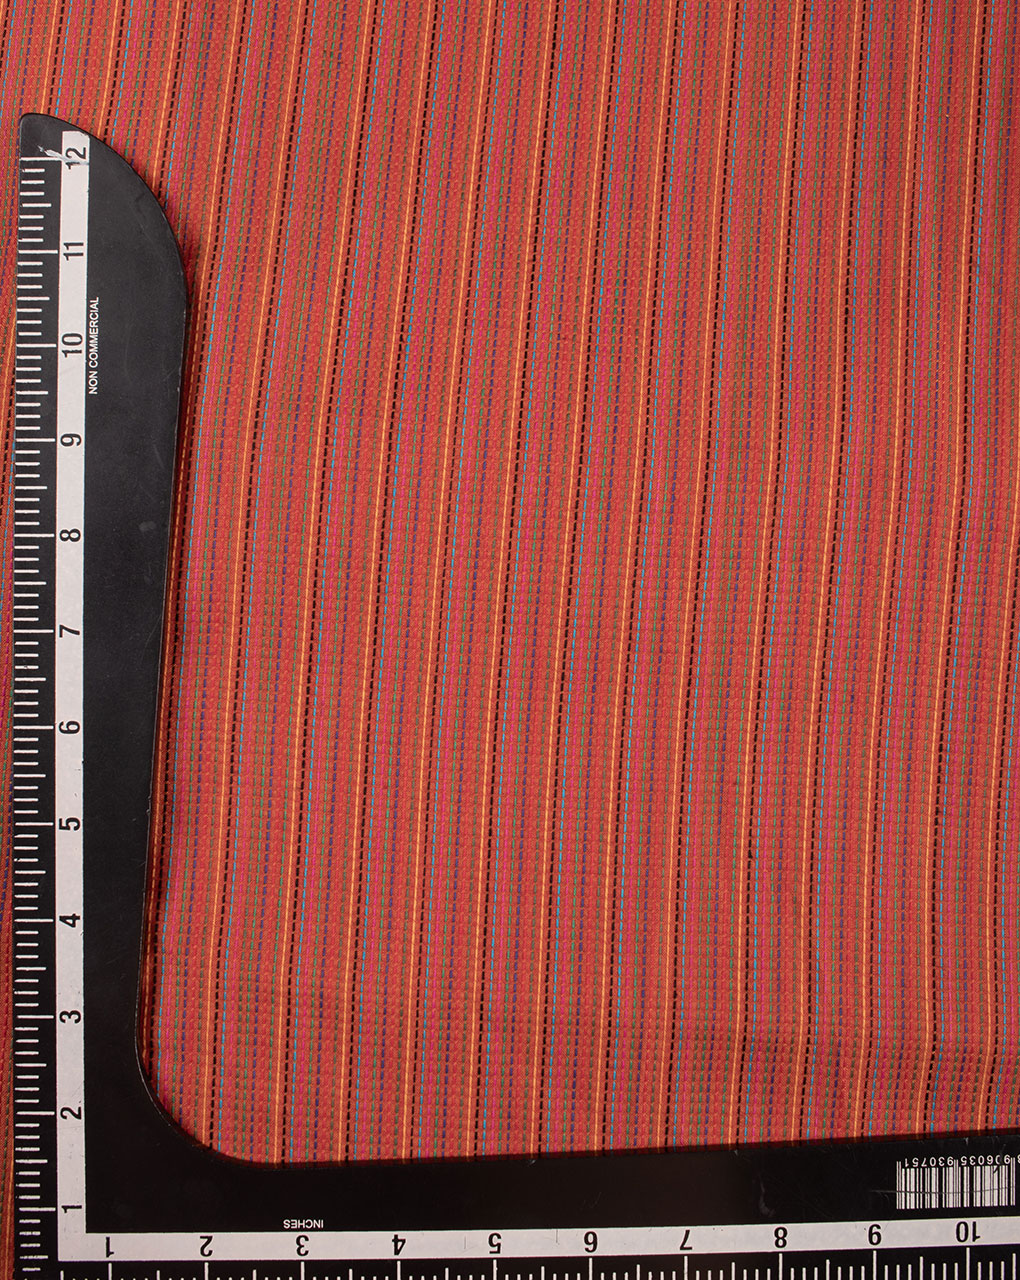 Stripes Woven Kantha Loom Textured Cotton Fabric - Fabriclore.com